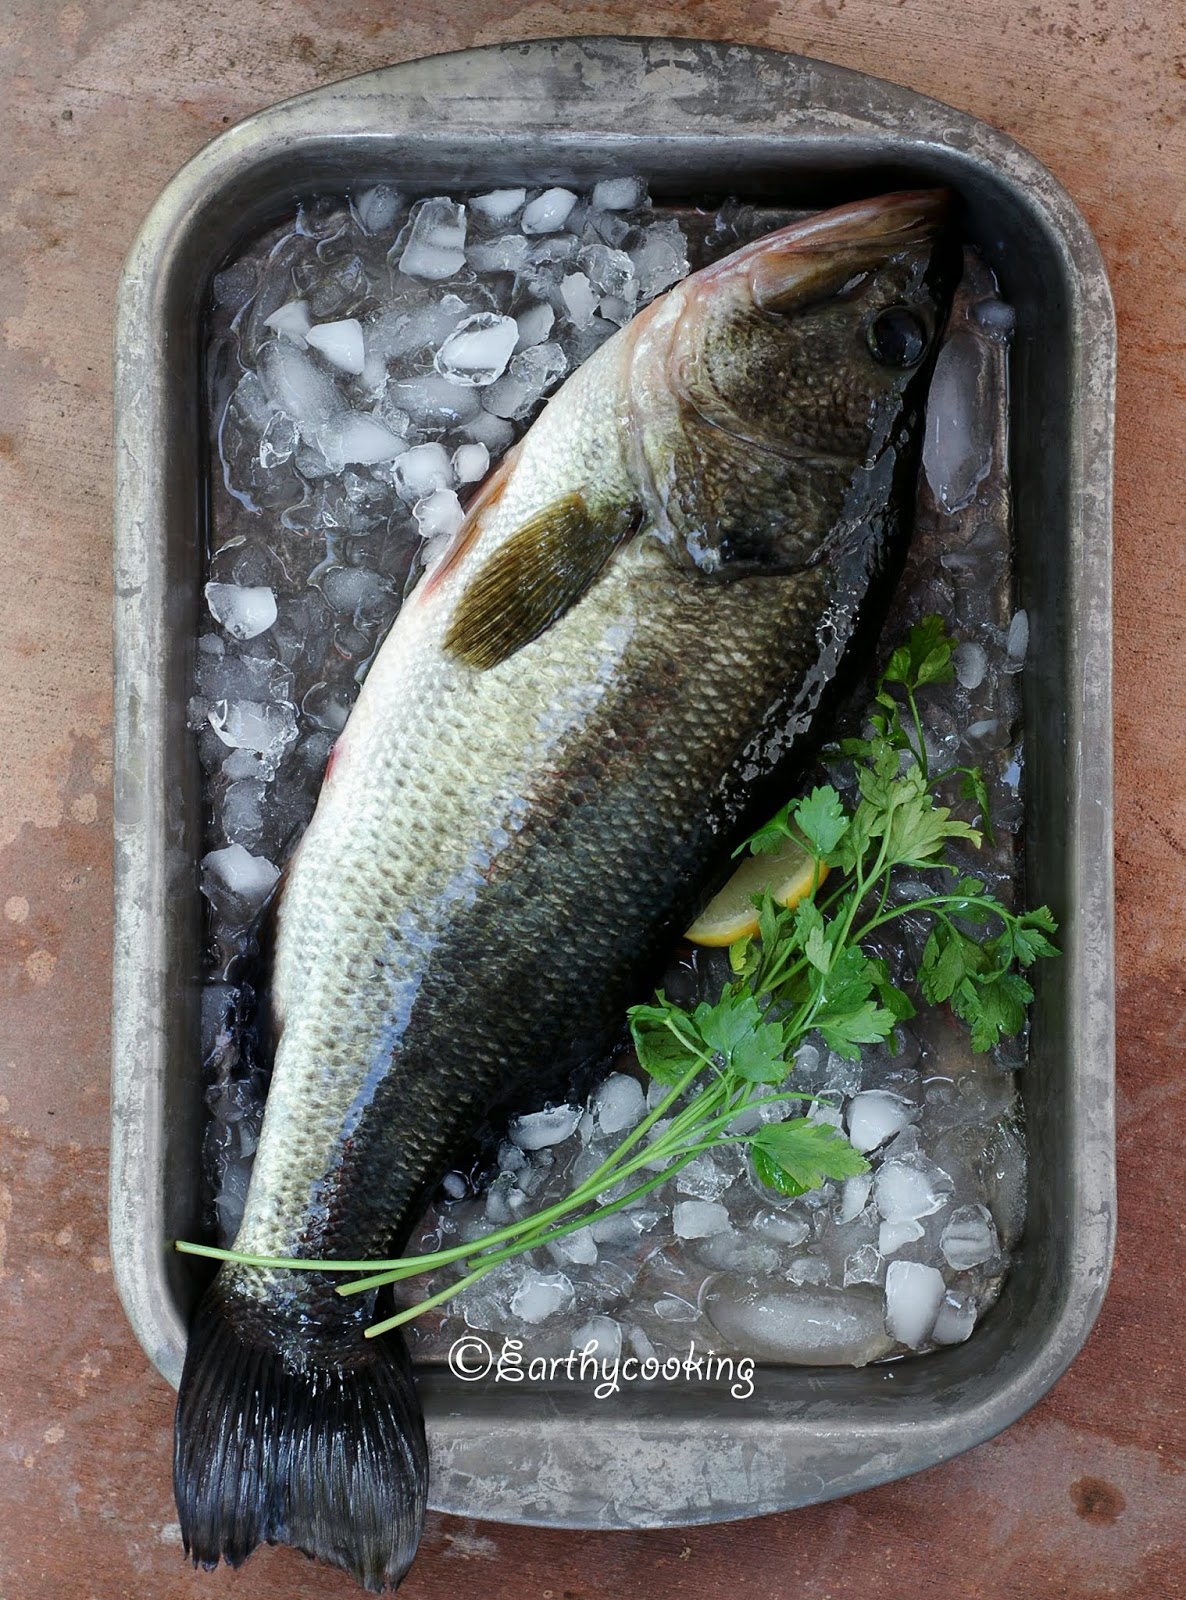 How to Cook Largemouth Bass  